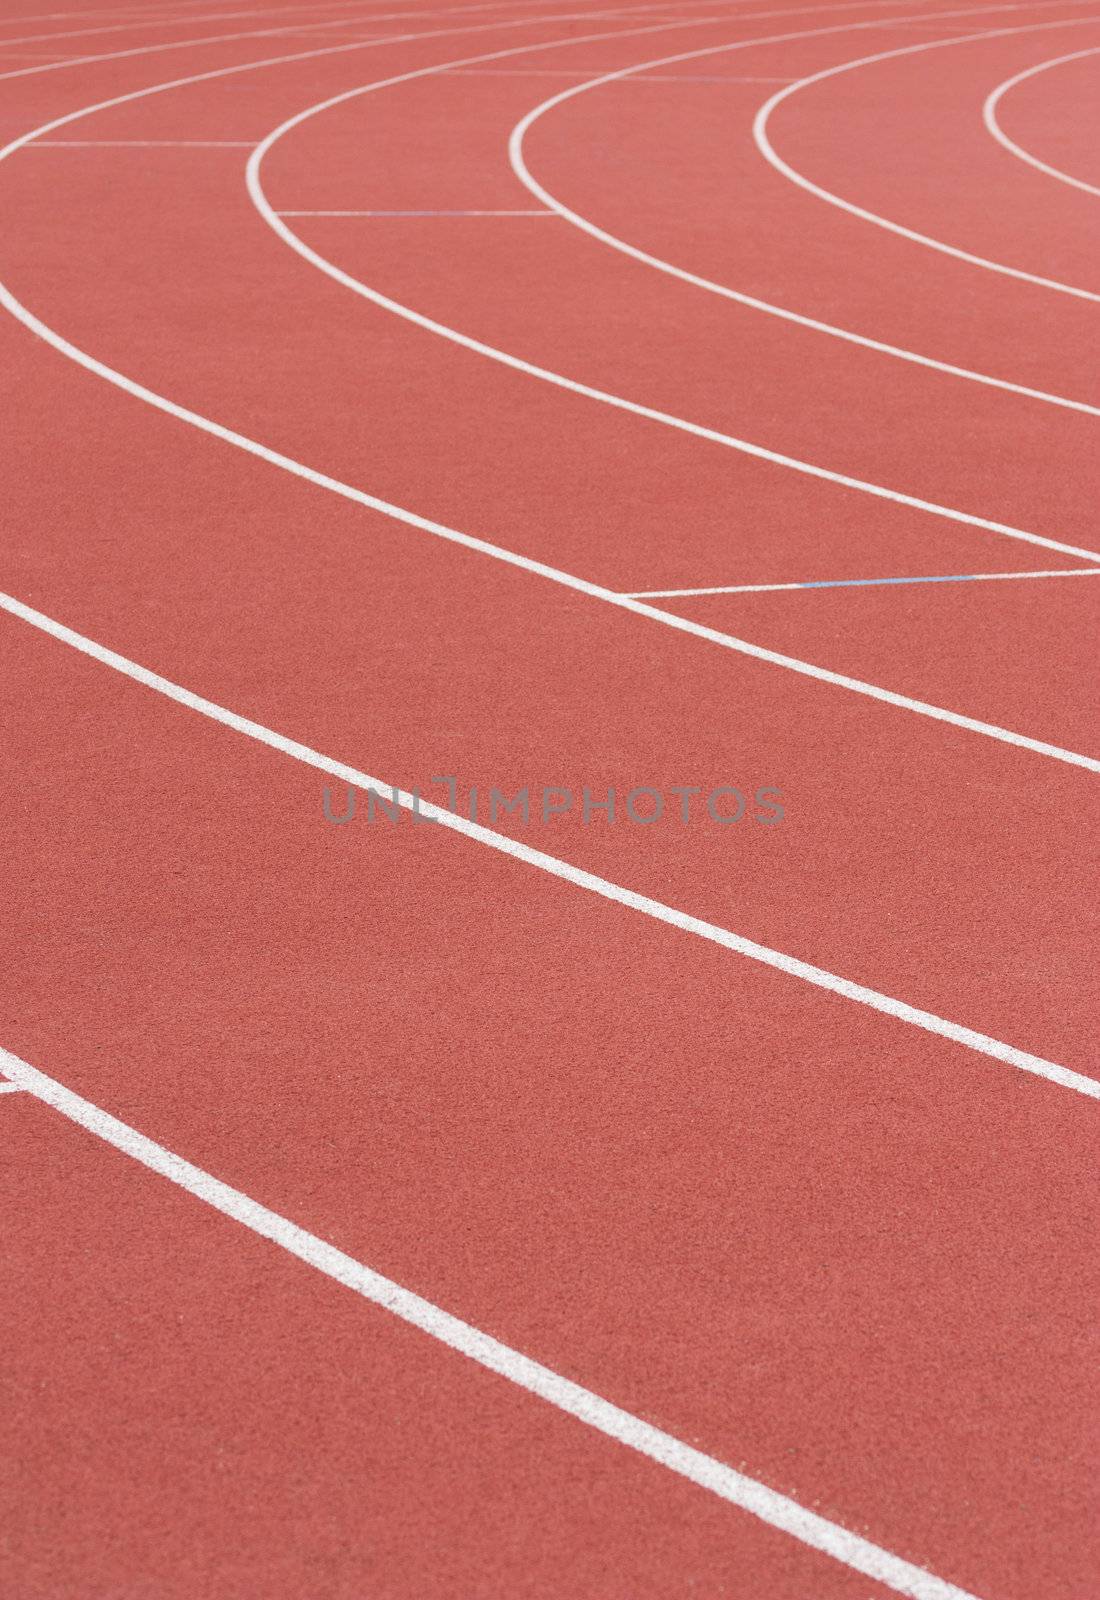 Athletics track with its lane, white lines and turn